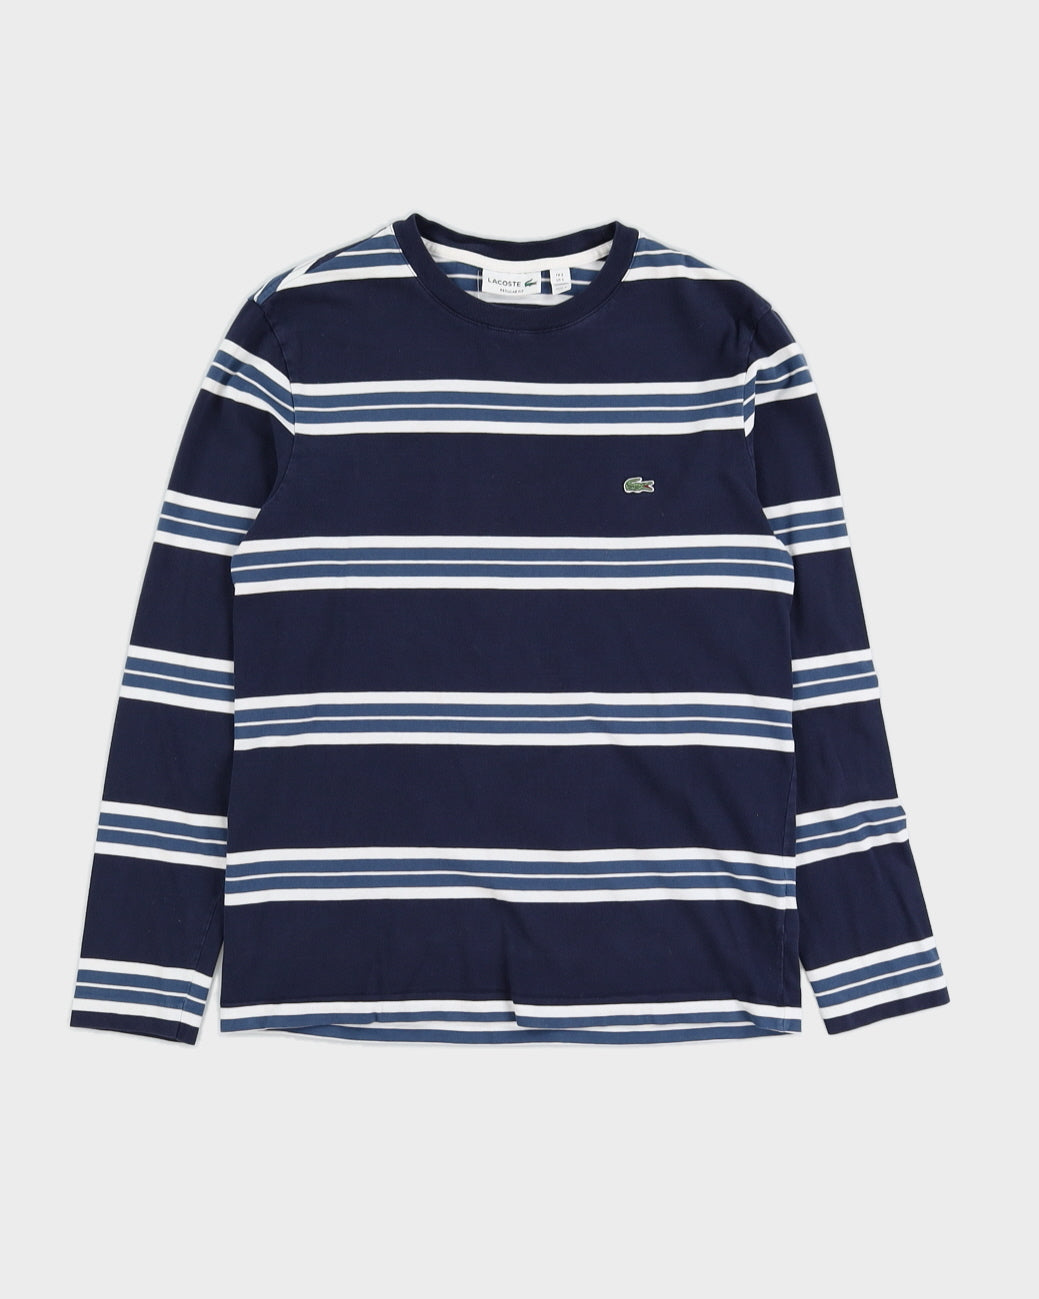 Lacoste Blue Striped Long Sleeved T-Shirt - S